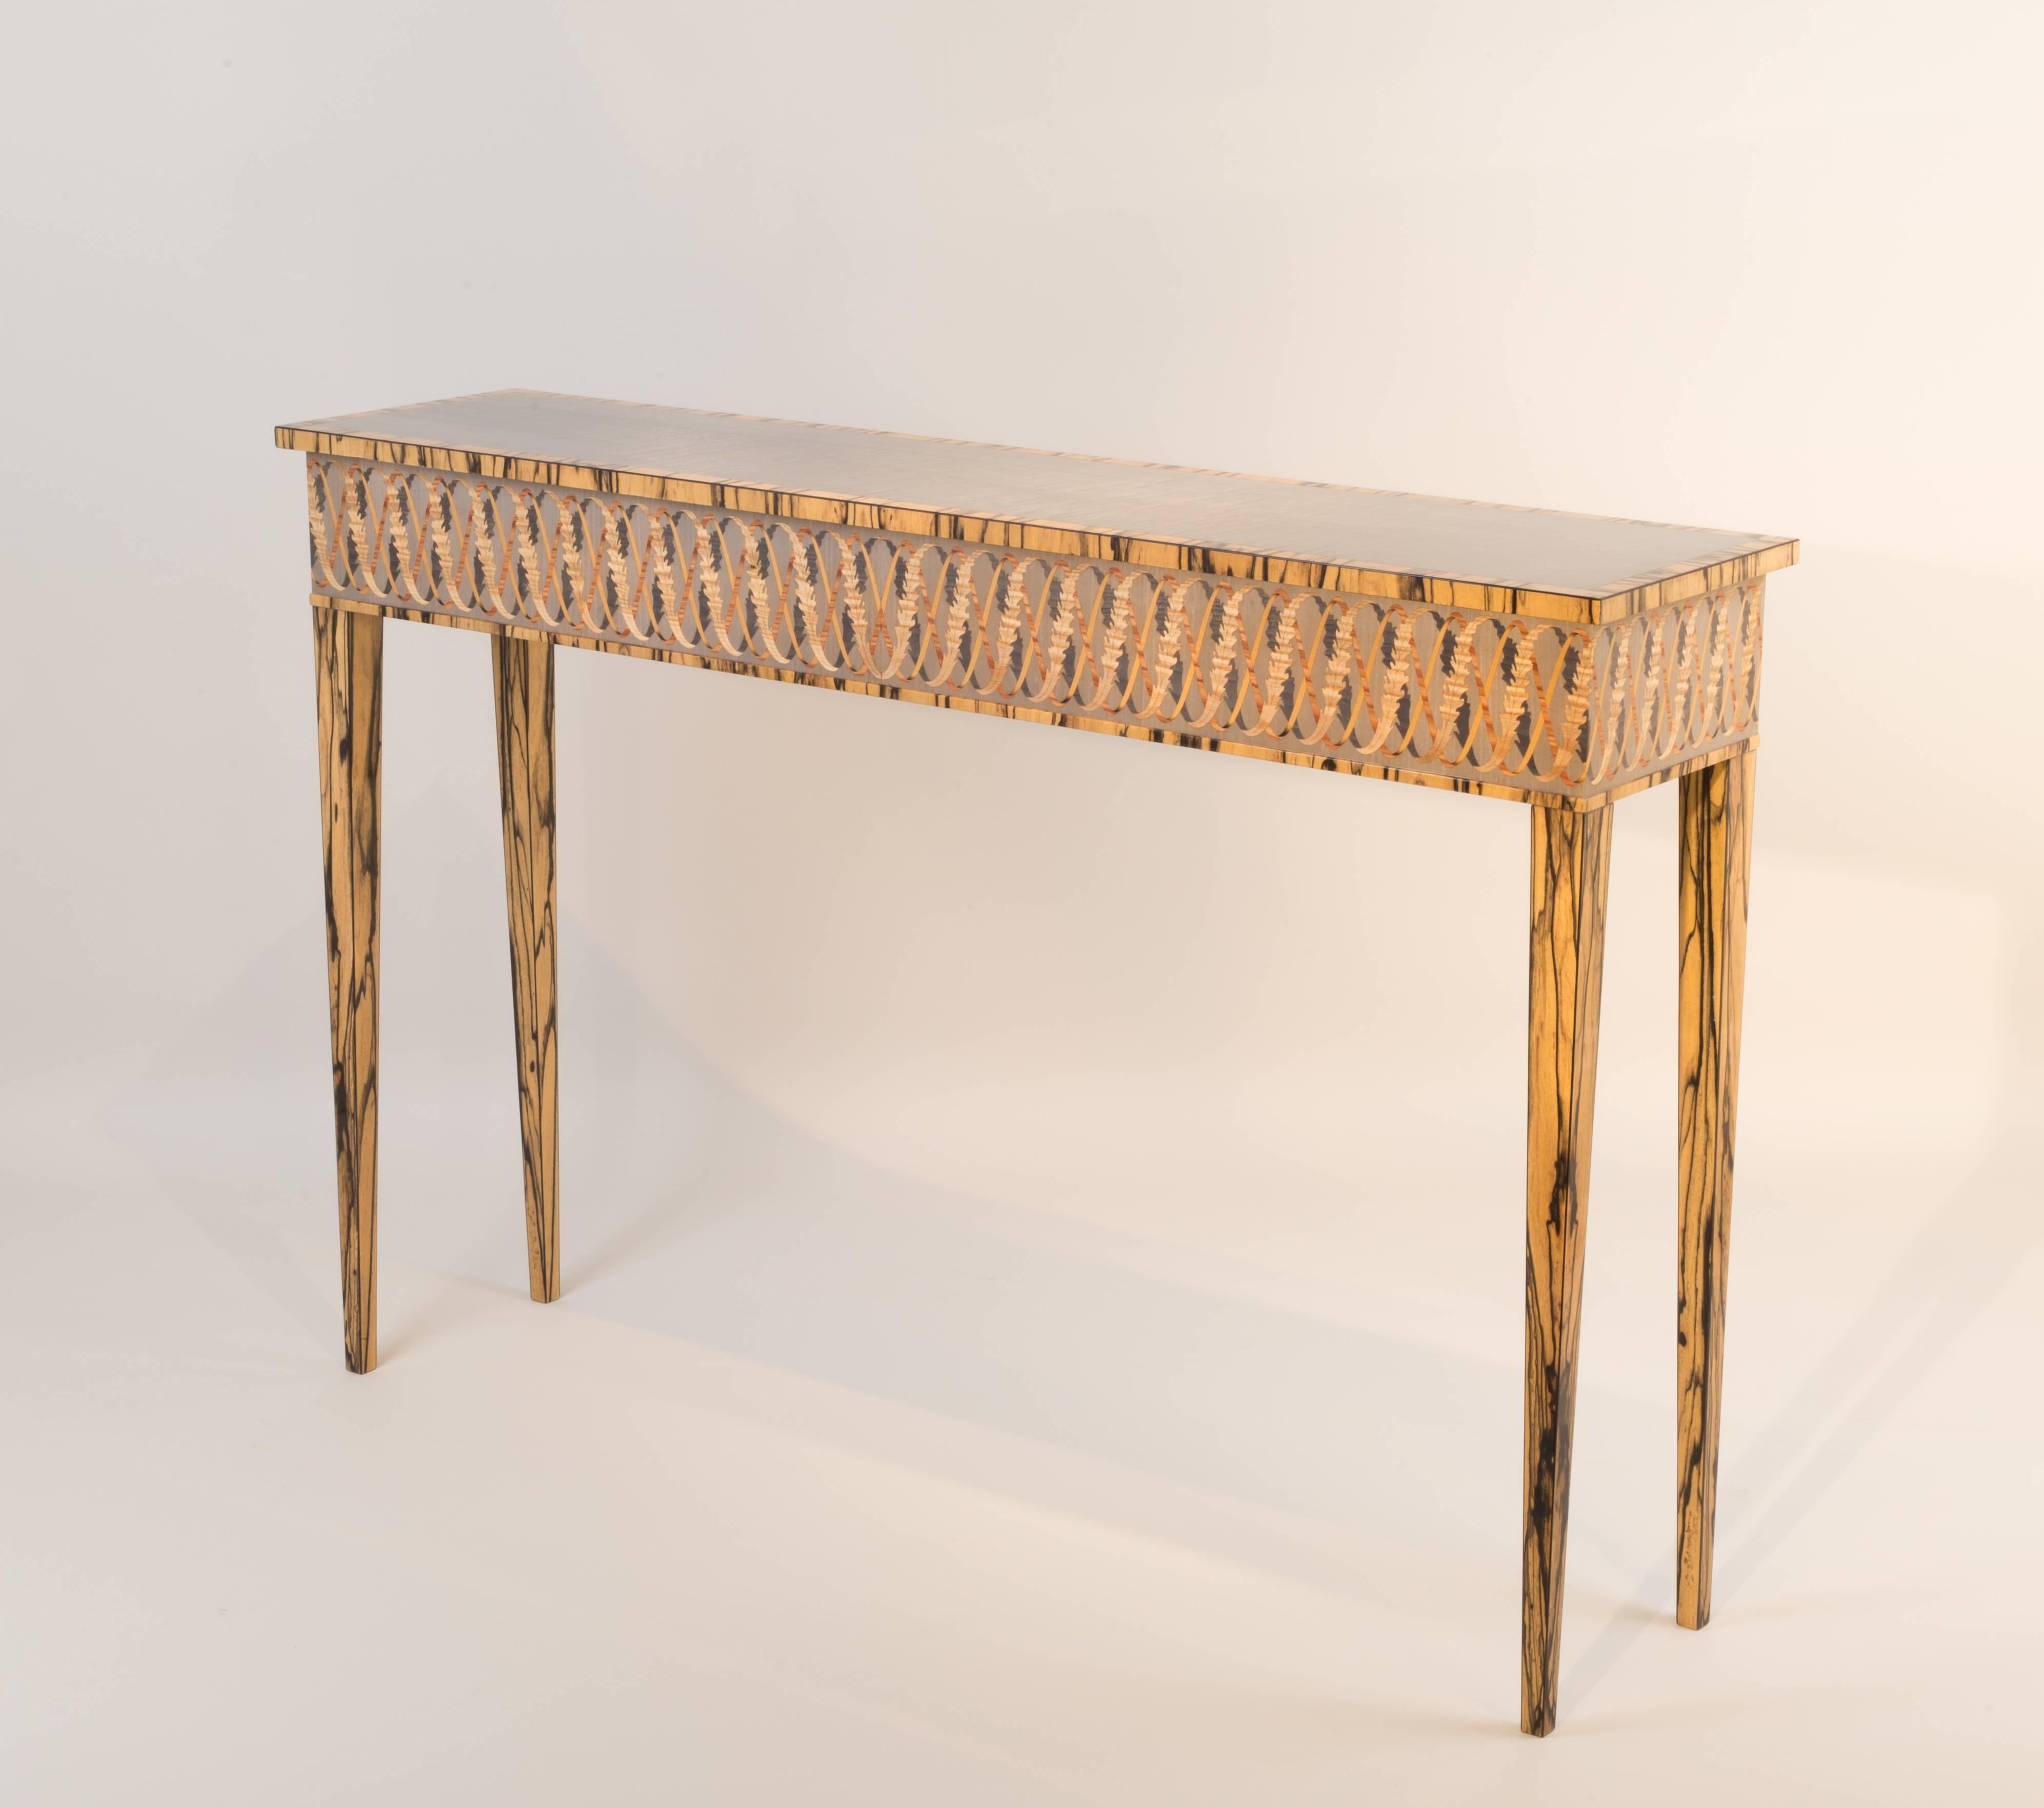 Raised on white ebony veneered legs the frieze helix is inlaid with ash, tulip and boxwood. Italian Sycamore supports the helix and is framed on the top by white ebony.
Ideally placed in a hallway or beneath a mirror this table is designed and